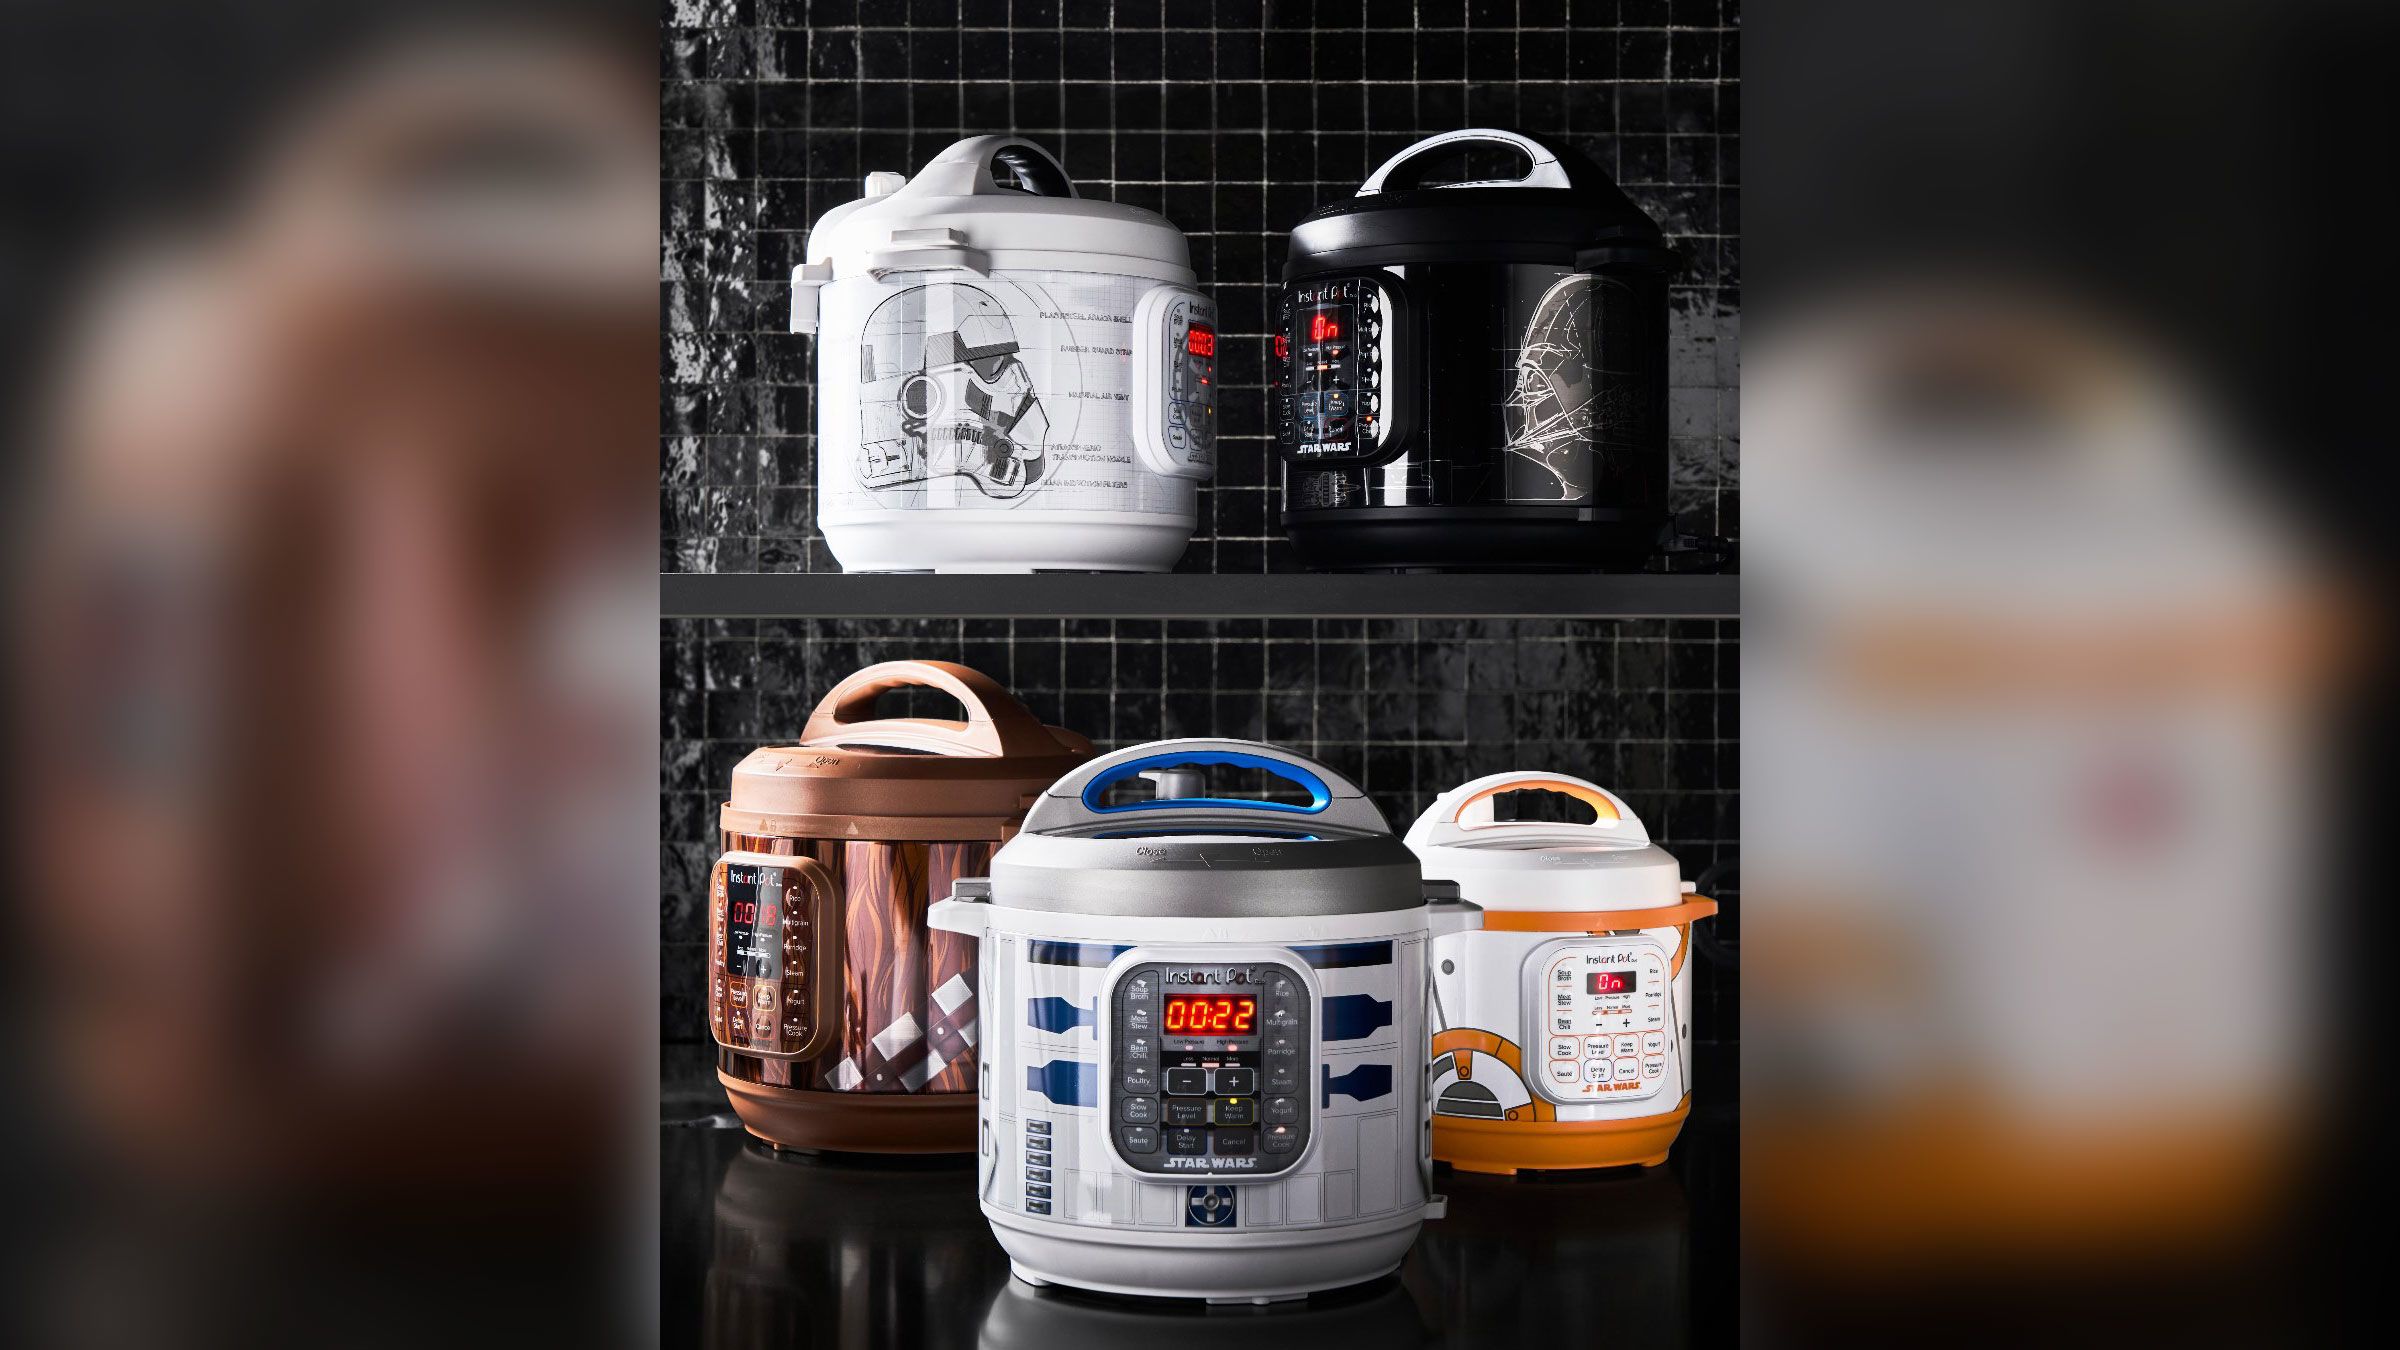 Star Wars Instant Pots: The force is strong with this inspired kitchenware